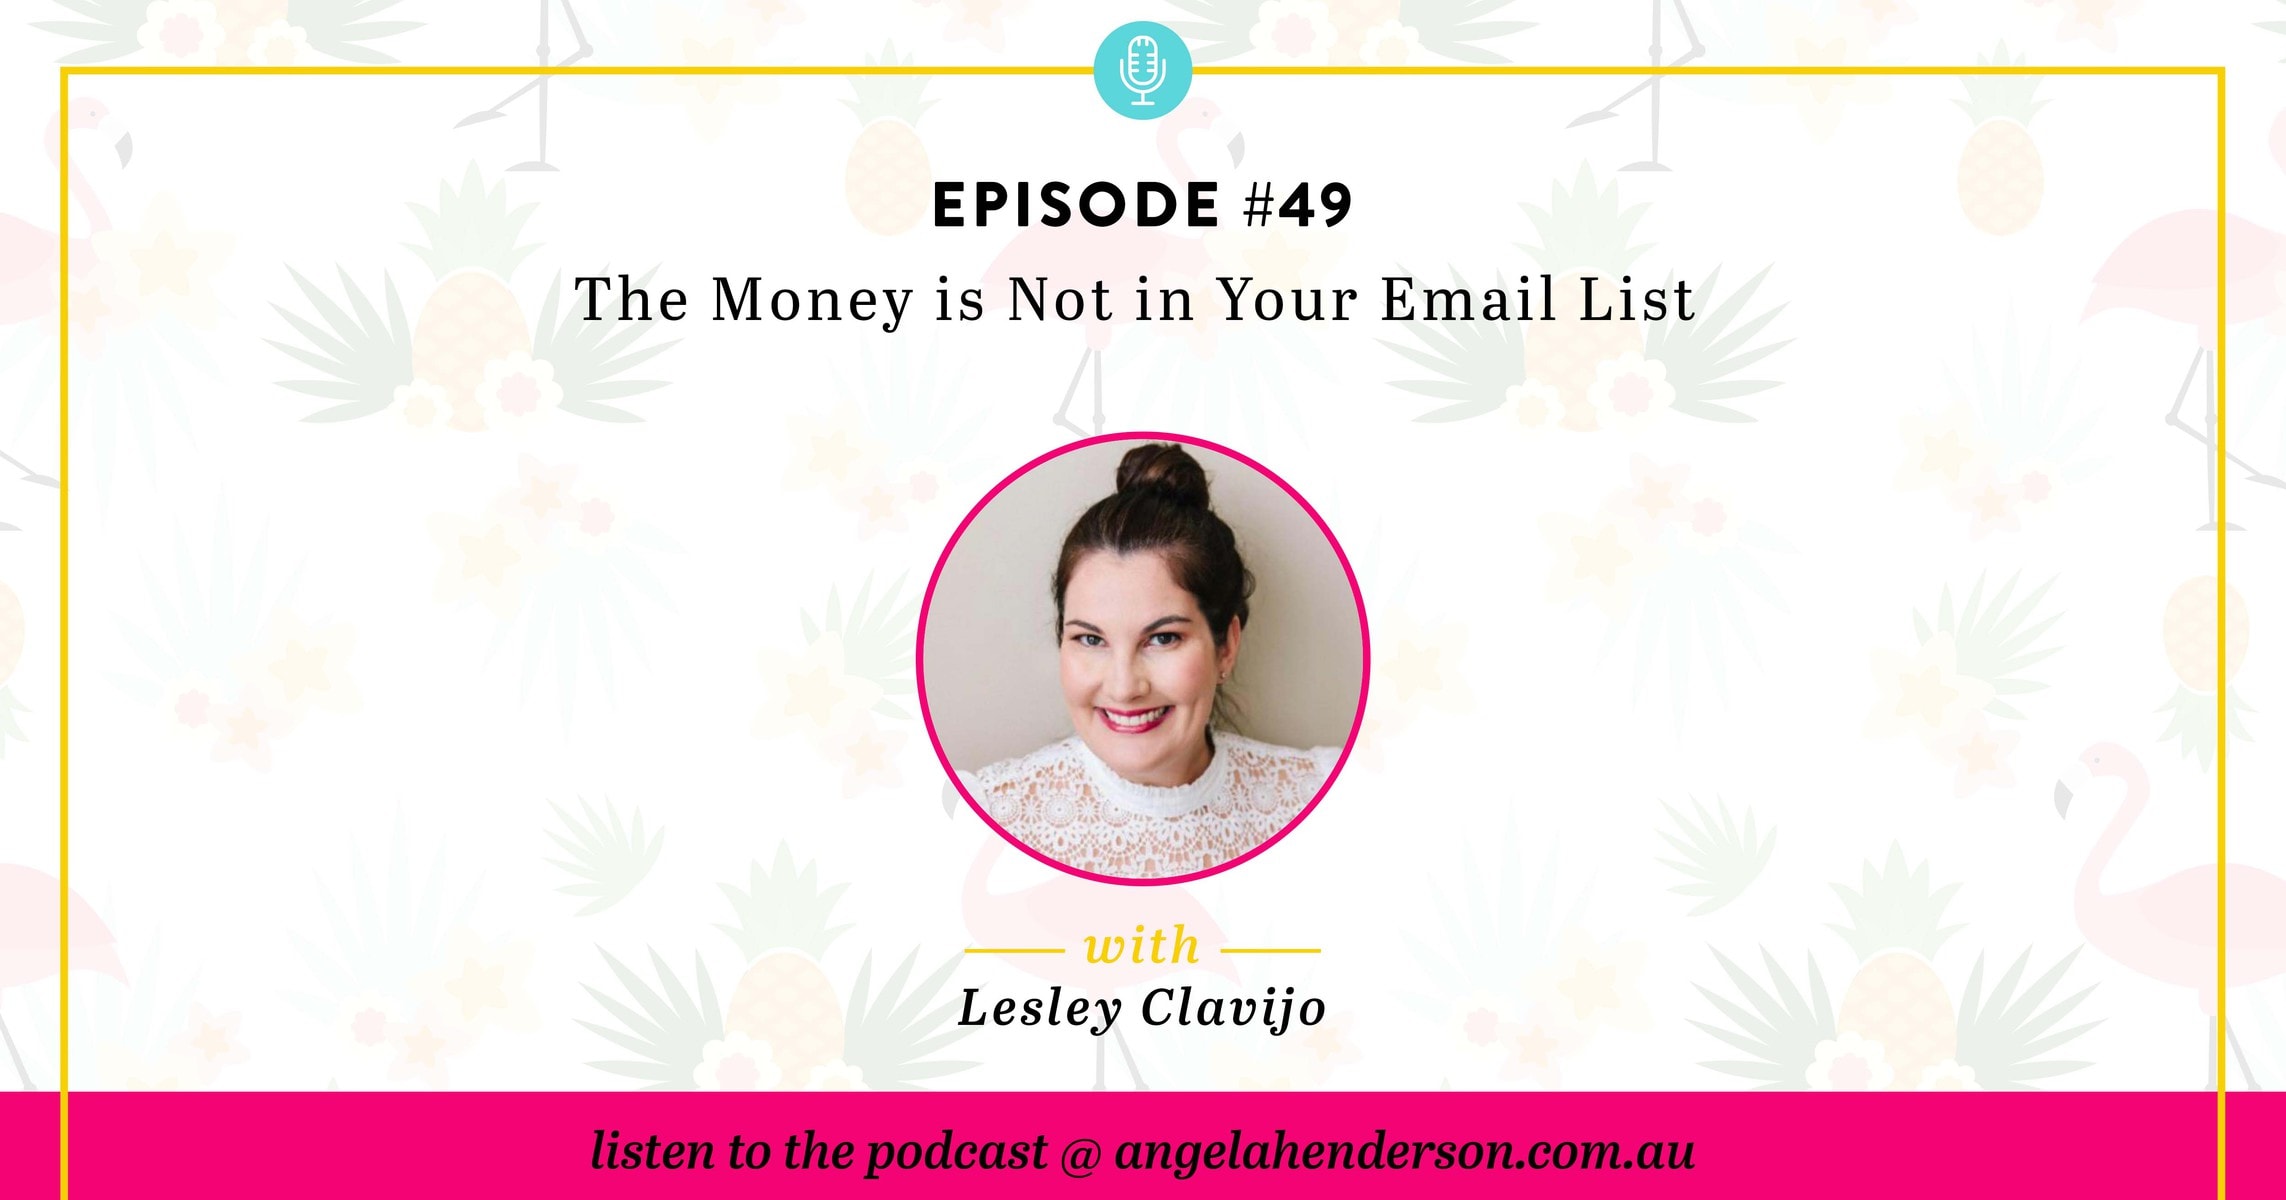 The Money is Not in Your Email List